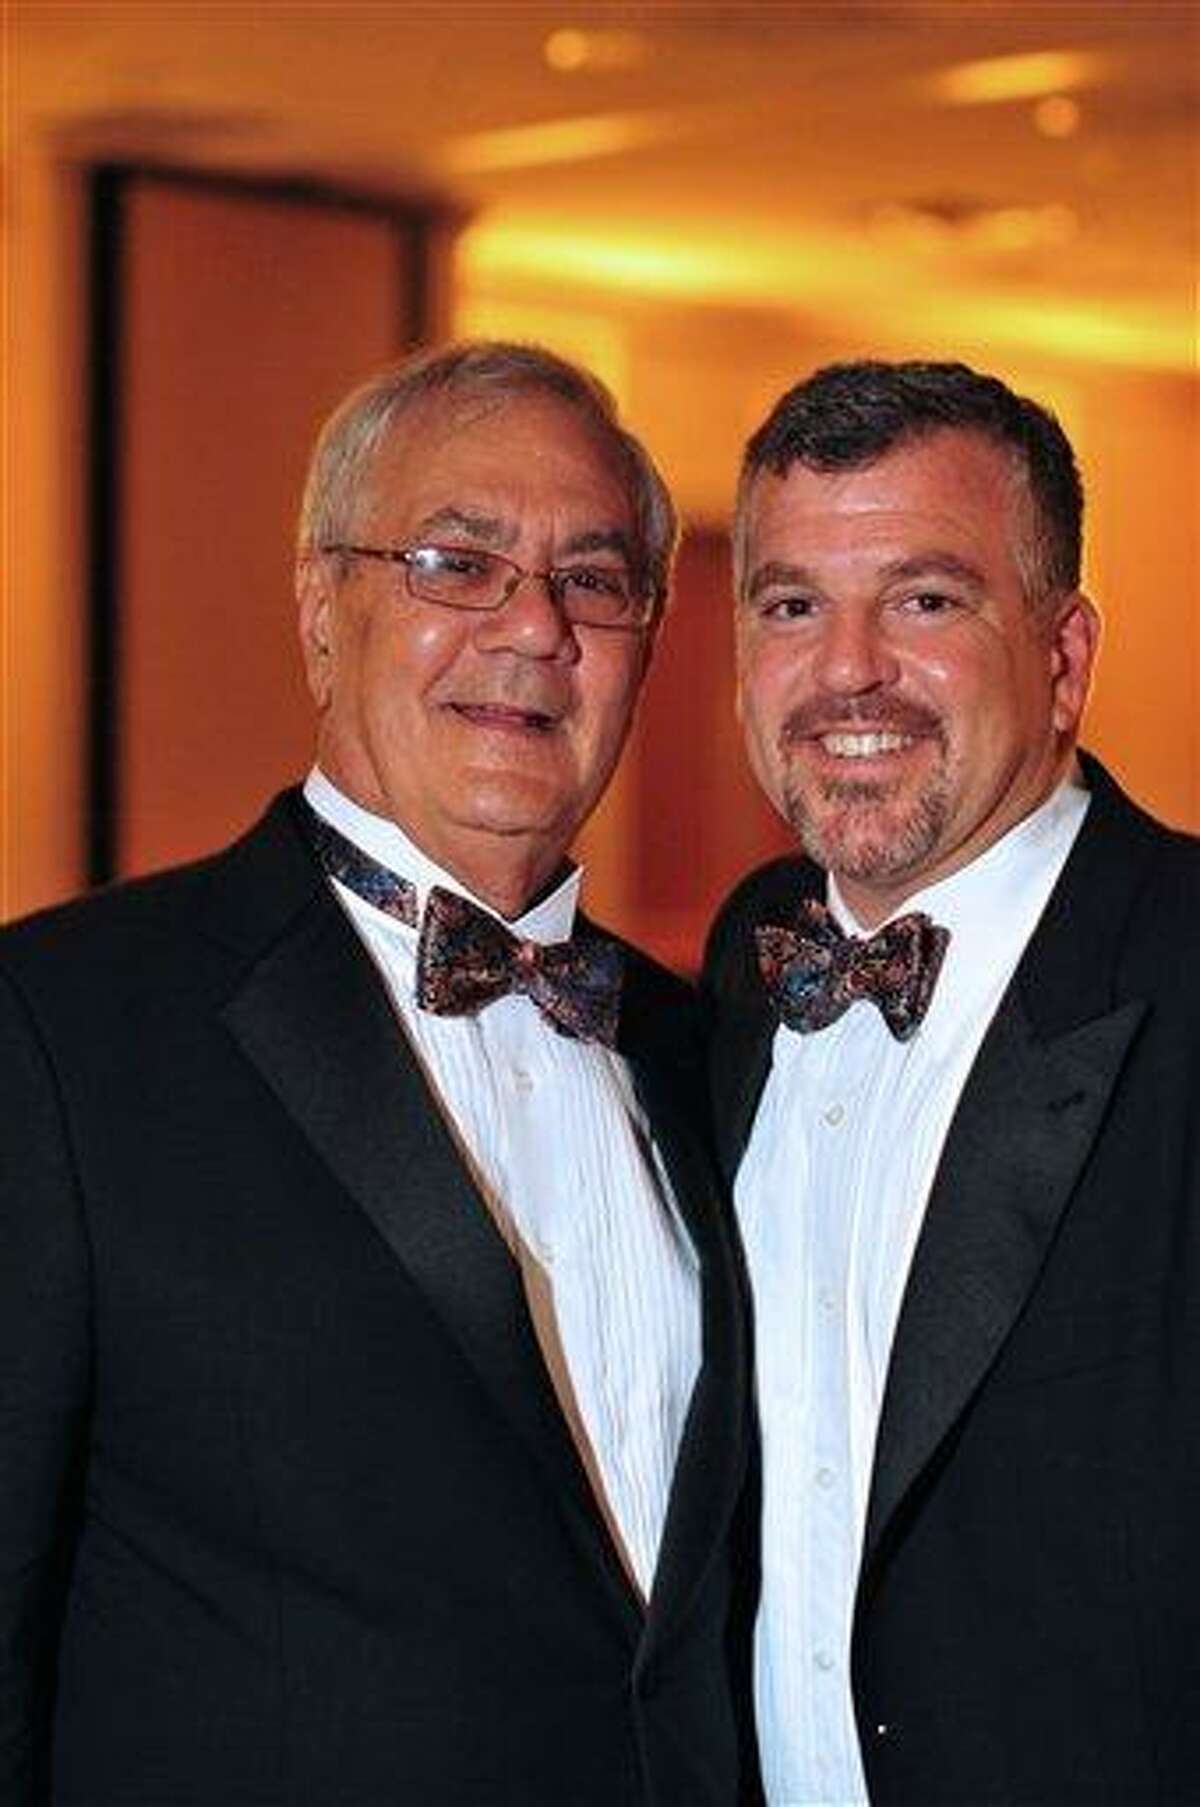 This image provided by Fotique shows U.S. Rep. Barney Frank, D-Mass., left, and Jim Ready posing at their wedding reception Saturday. Frank married his longtime partner in a ceremony officiated by Massachusetts Gov. Deval Patrick in Newton, Mass. Associated Press